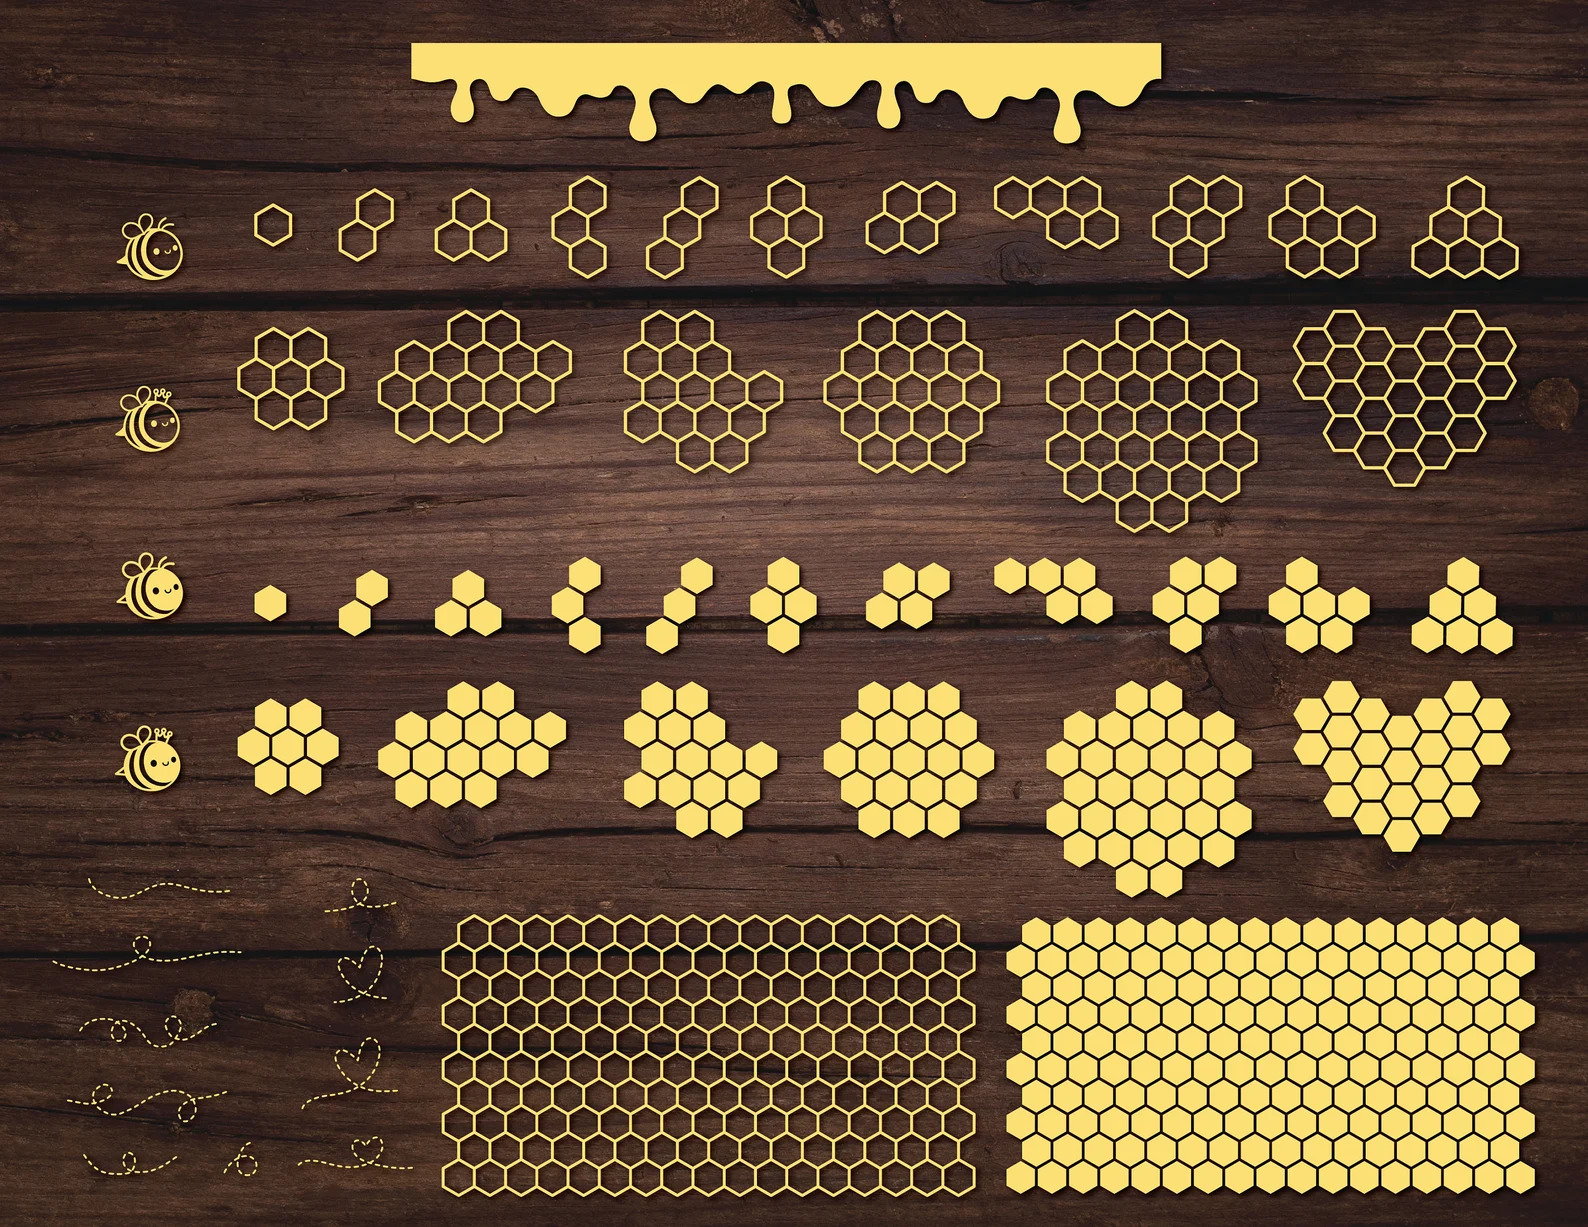 Wooden table topped with lots of honeycombs.